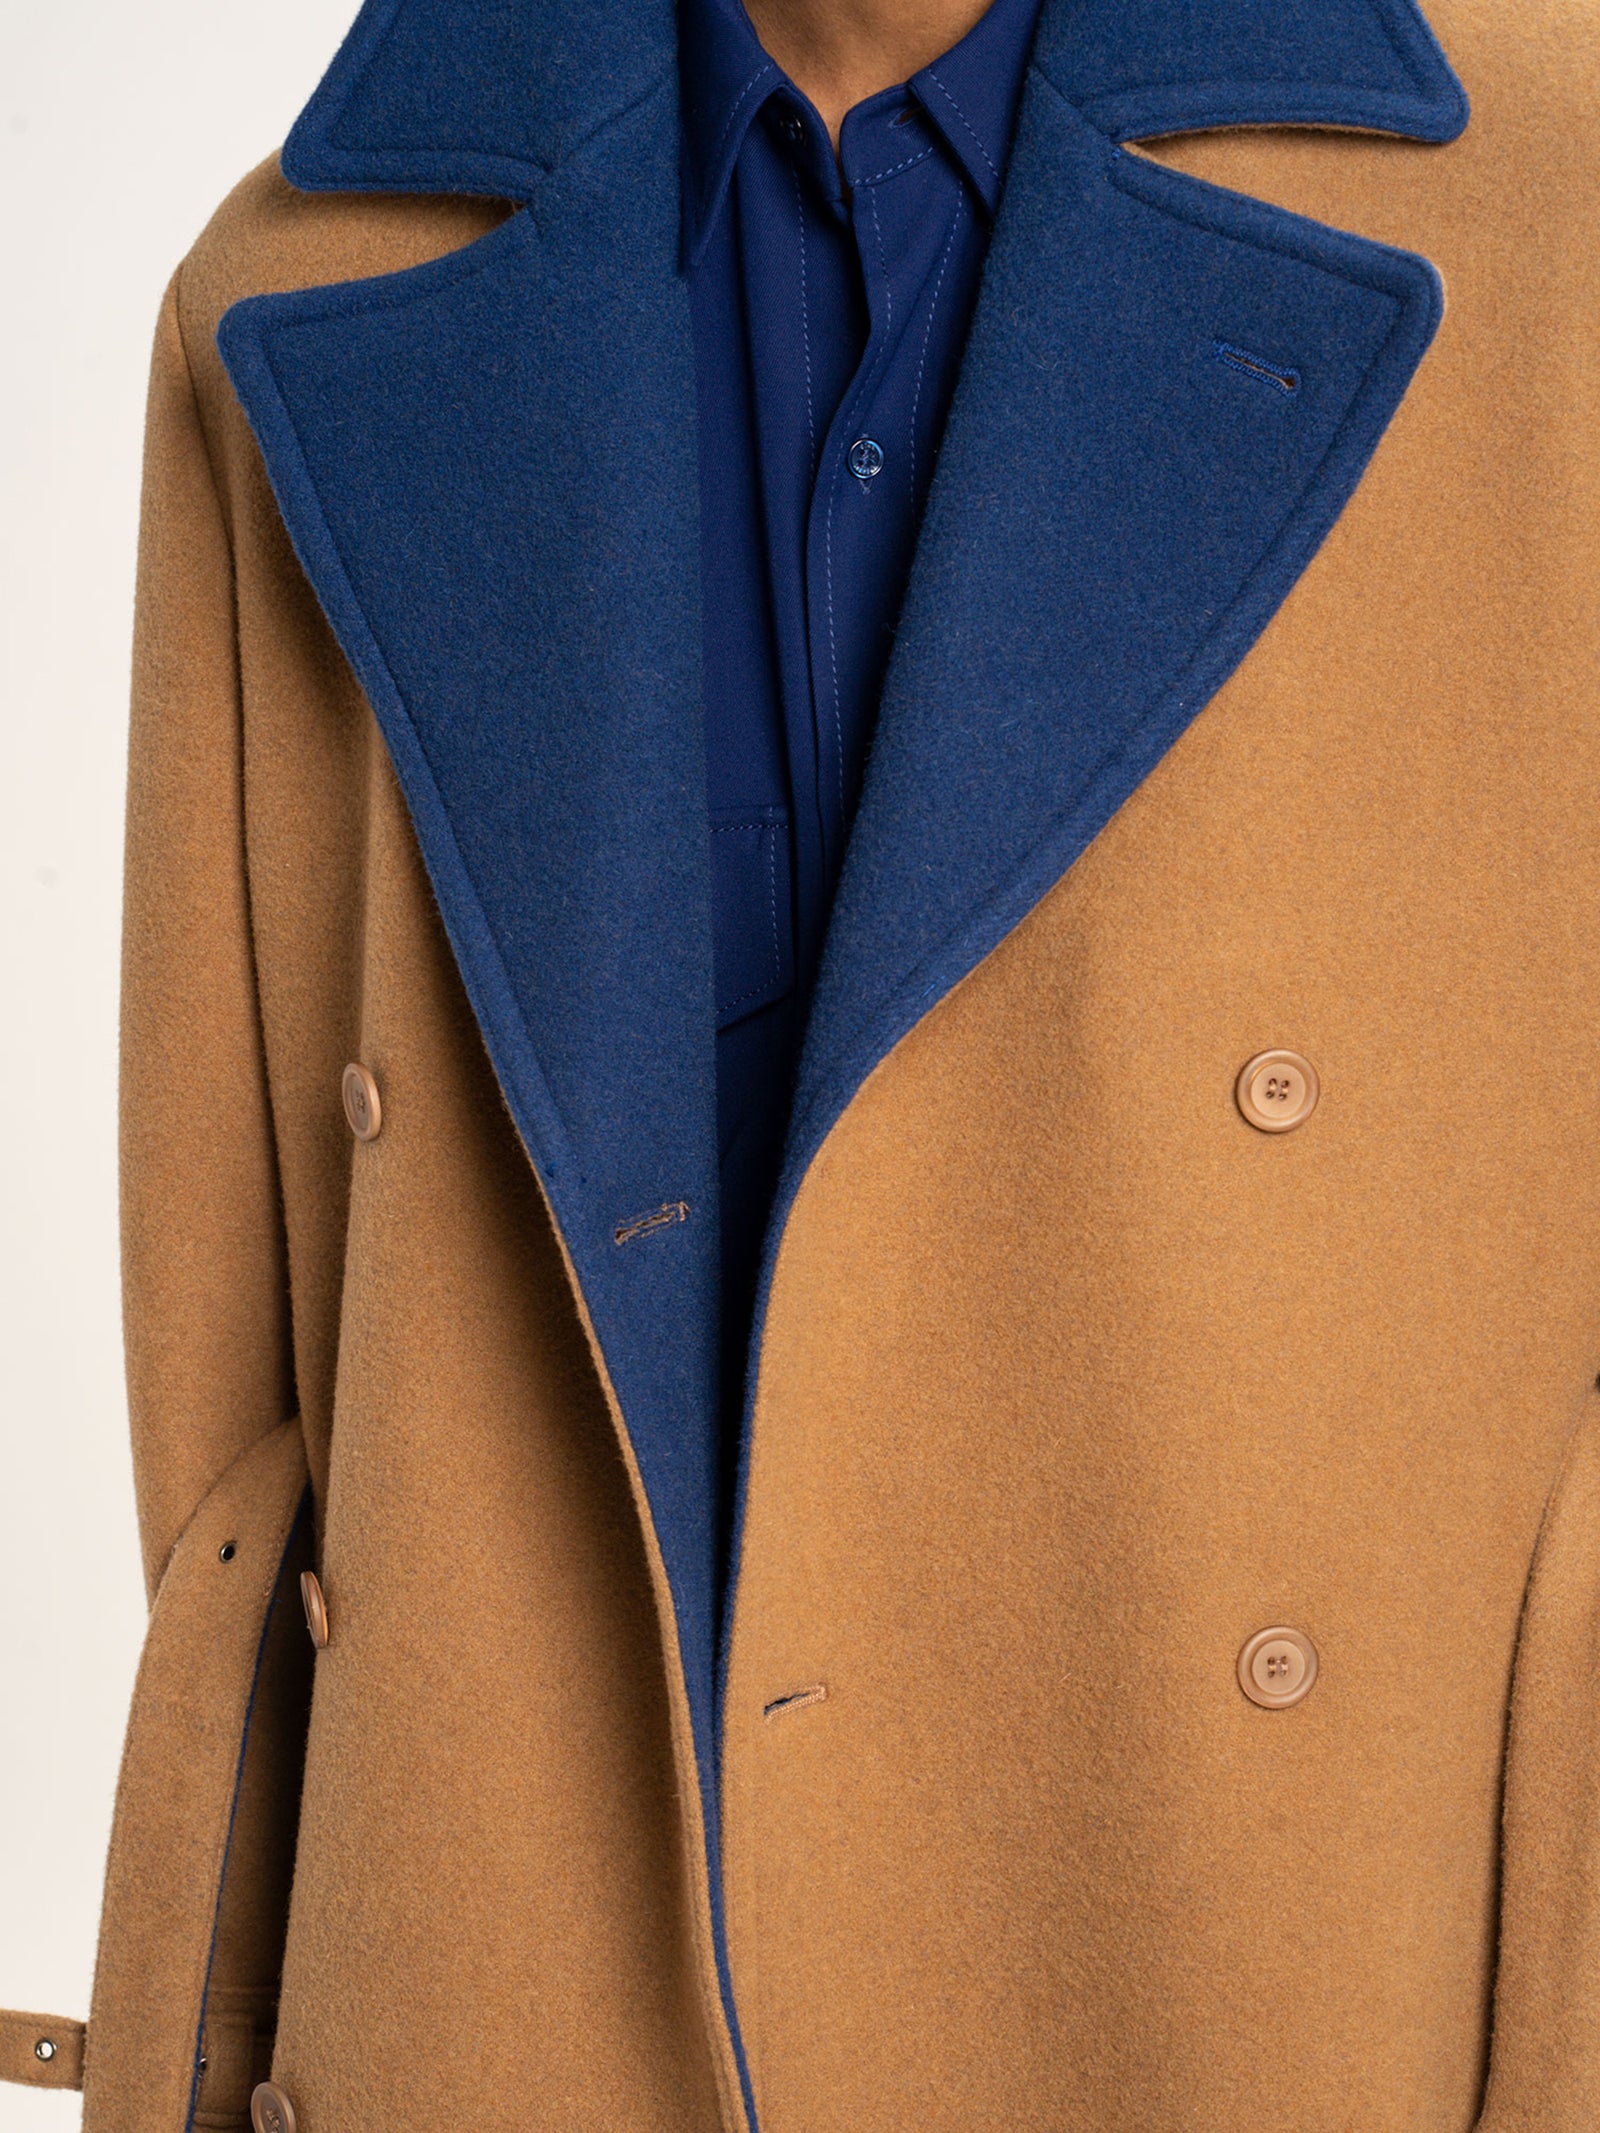 Emerson Wool Trench